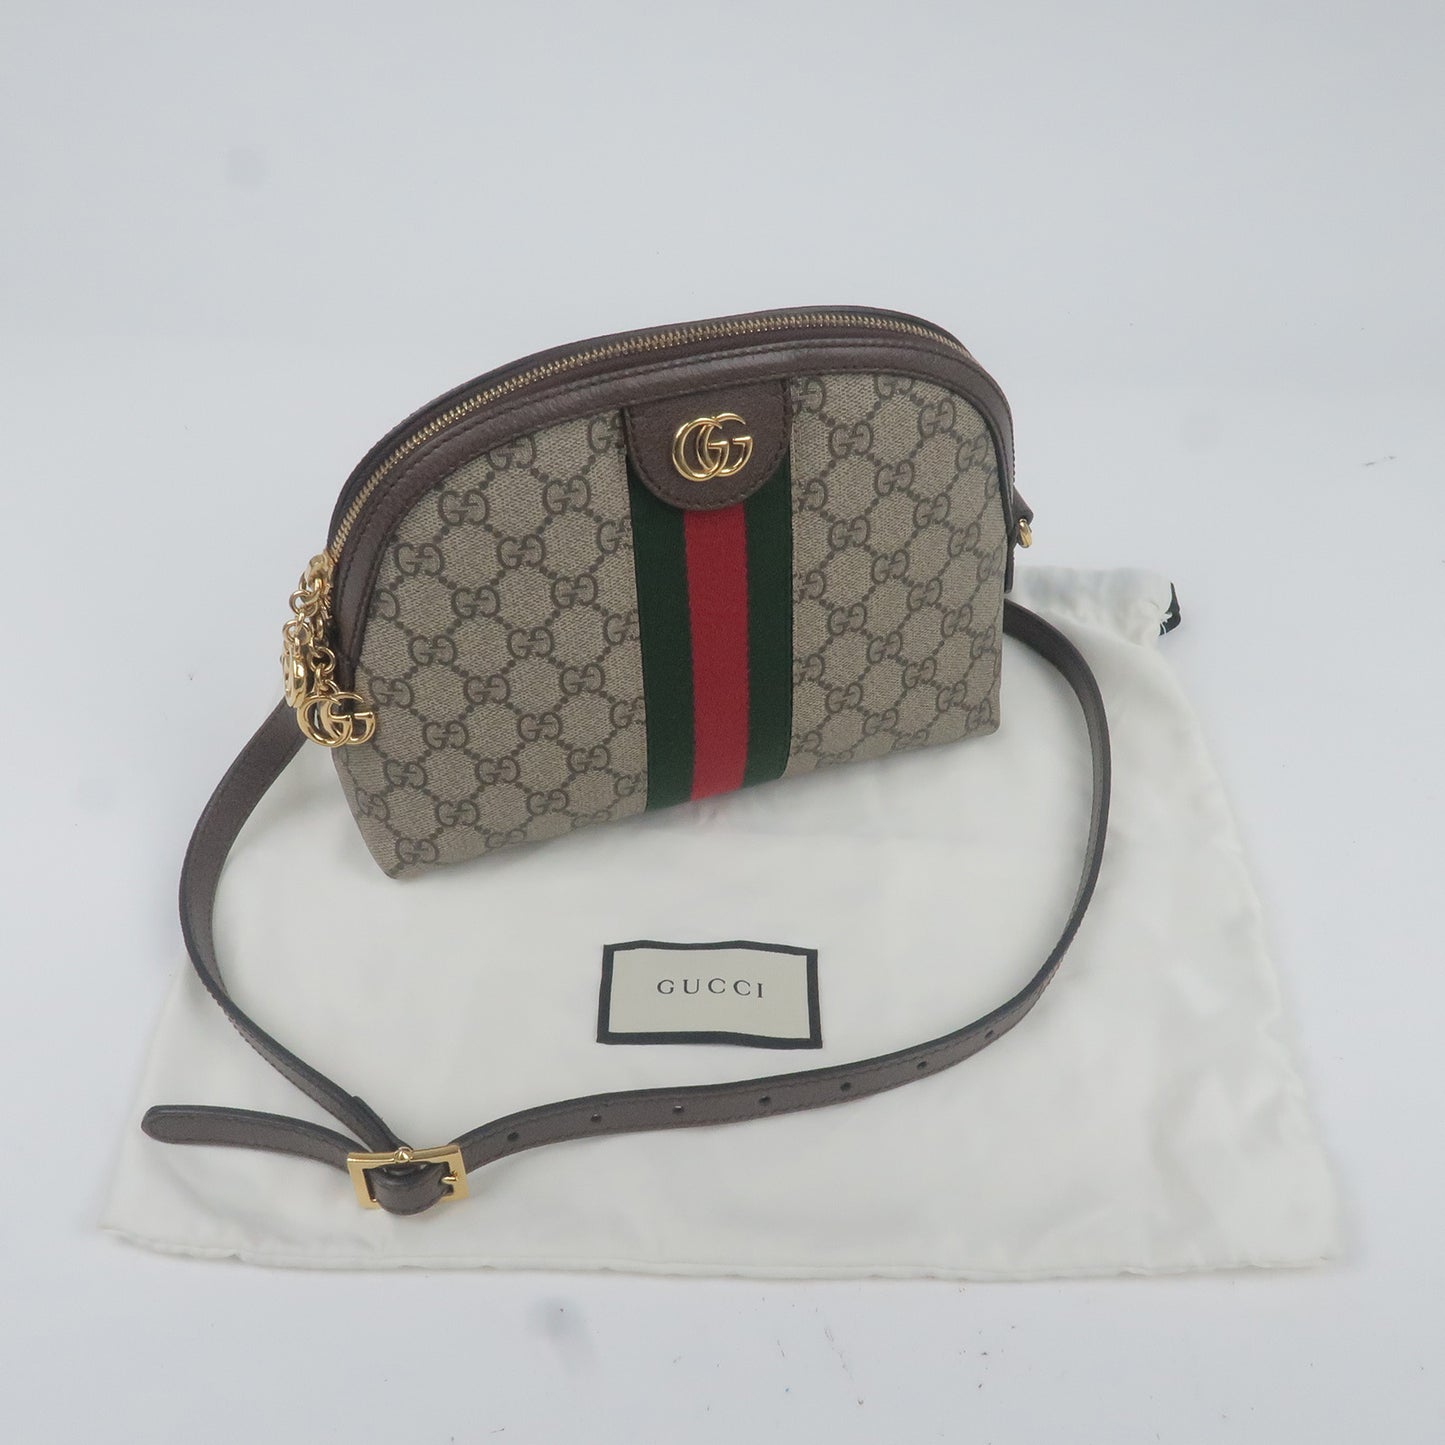 GUCCI Sherry Ophidia GG Supreme Leather Shoulder Bag 499621